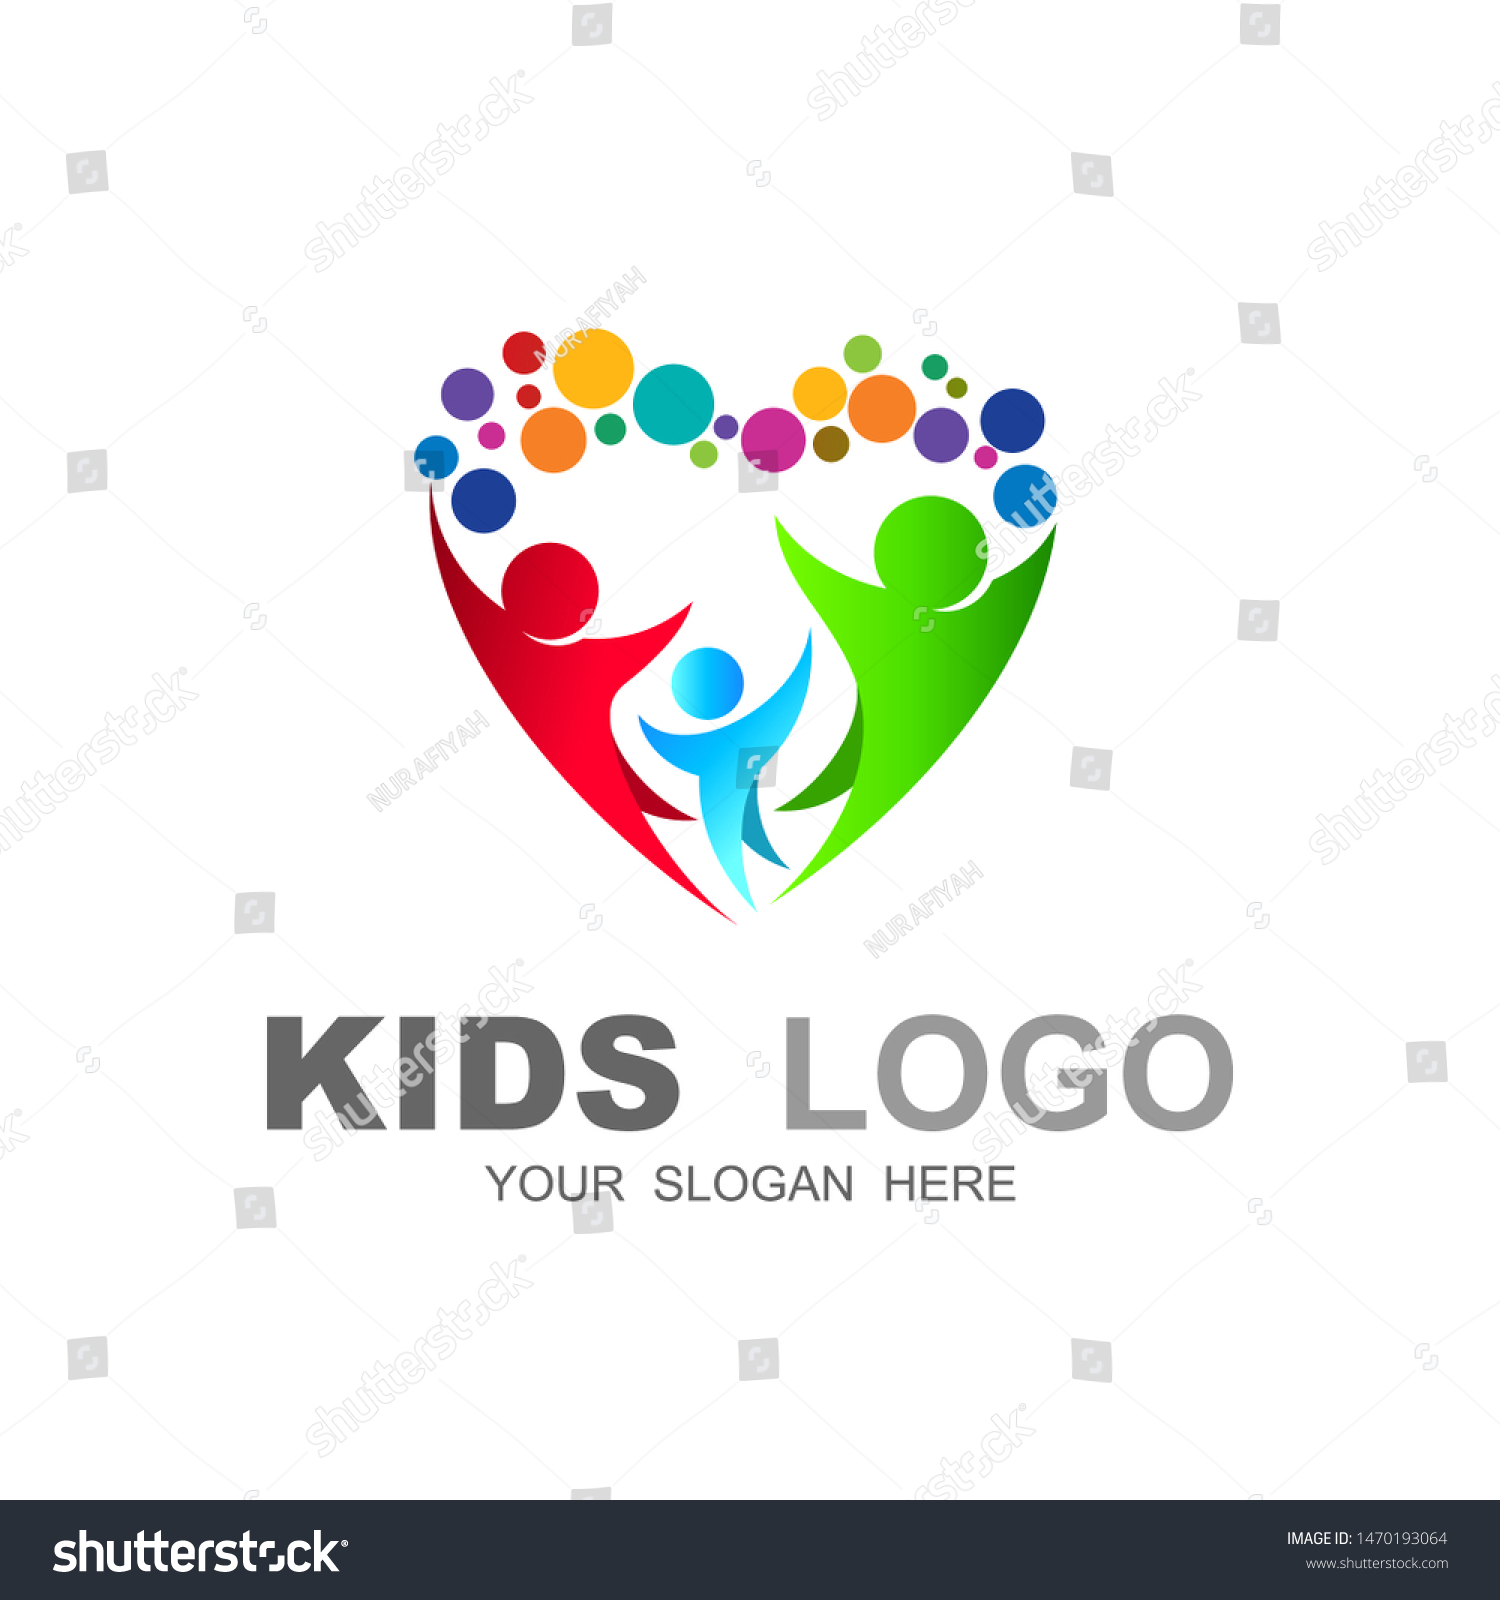 abstract family icon, together symbol, vector logo, love and charity icon #1470193064